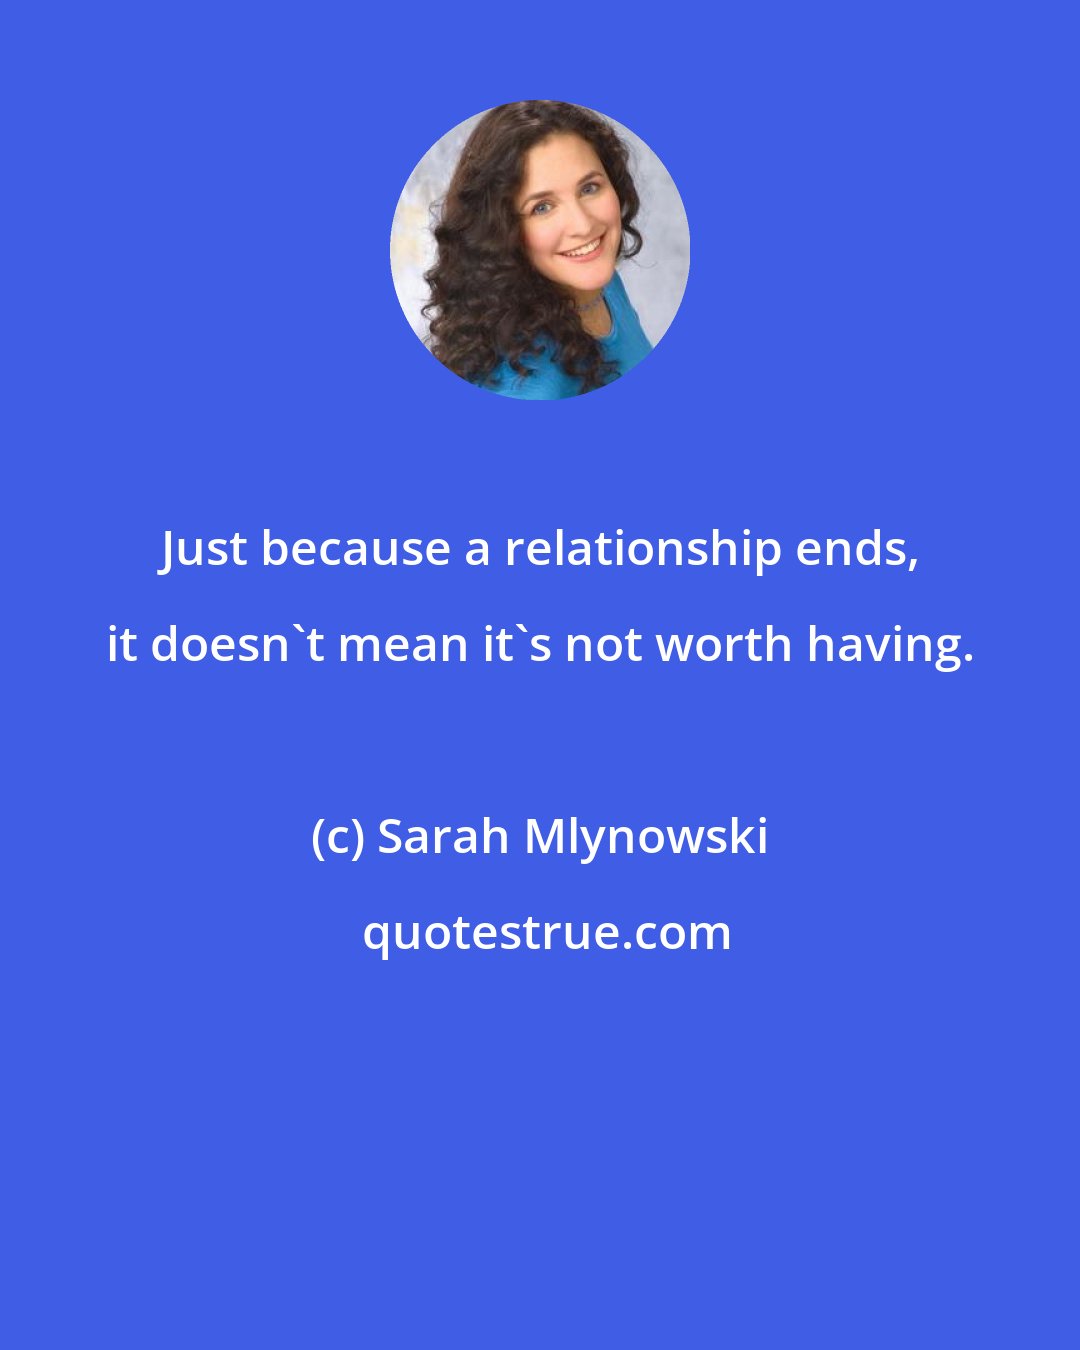 Sarah Mlynowski: Just because a relationship ends, it doesn't mean it's not worth having.